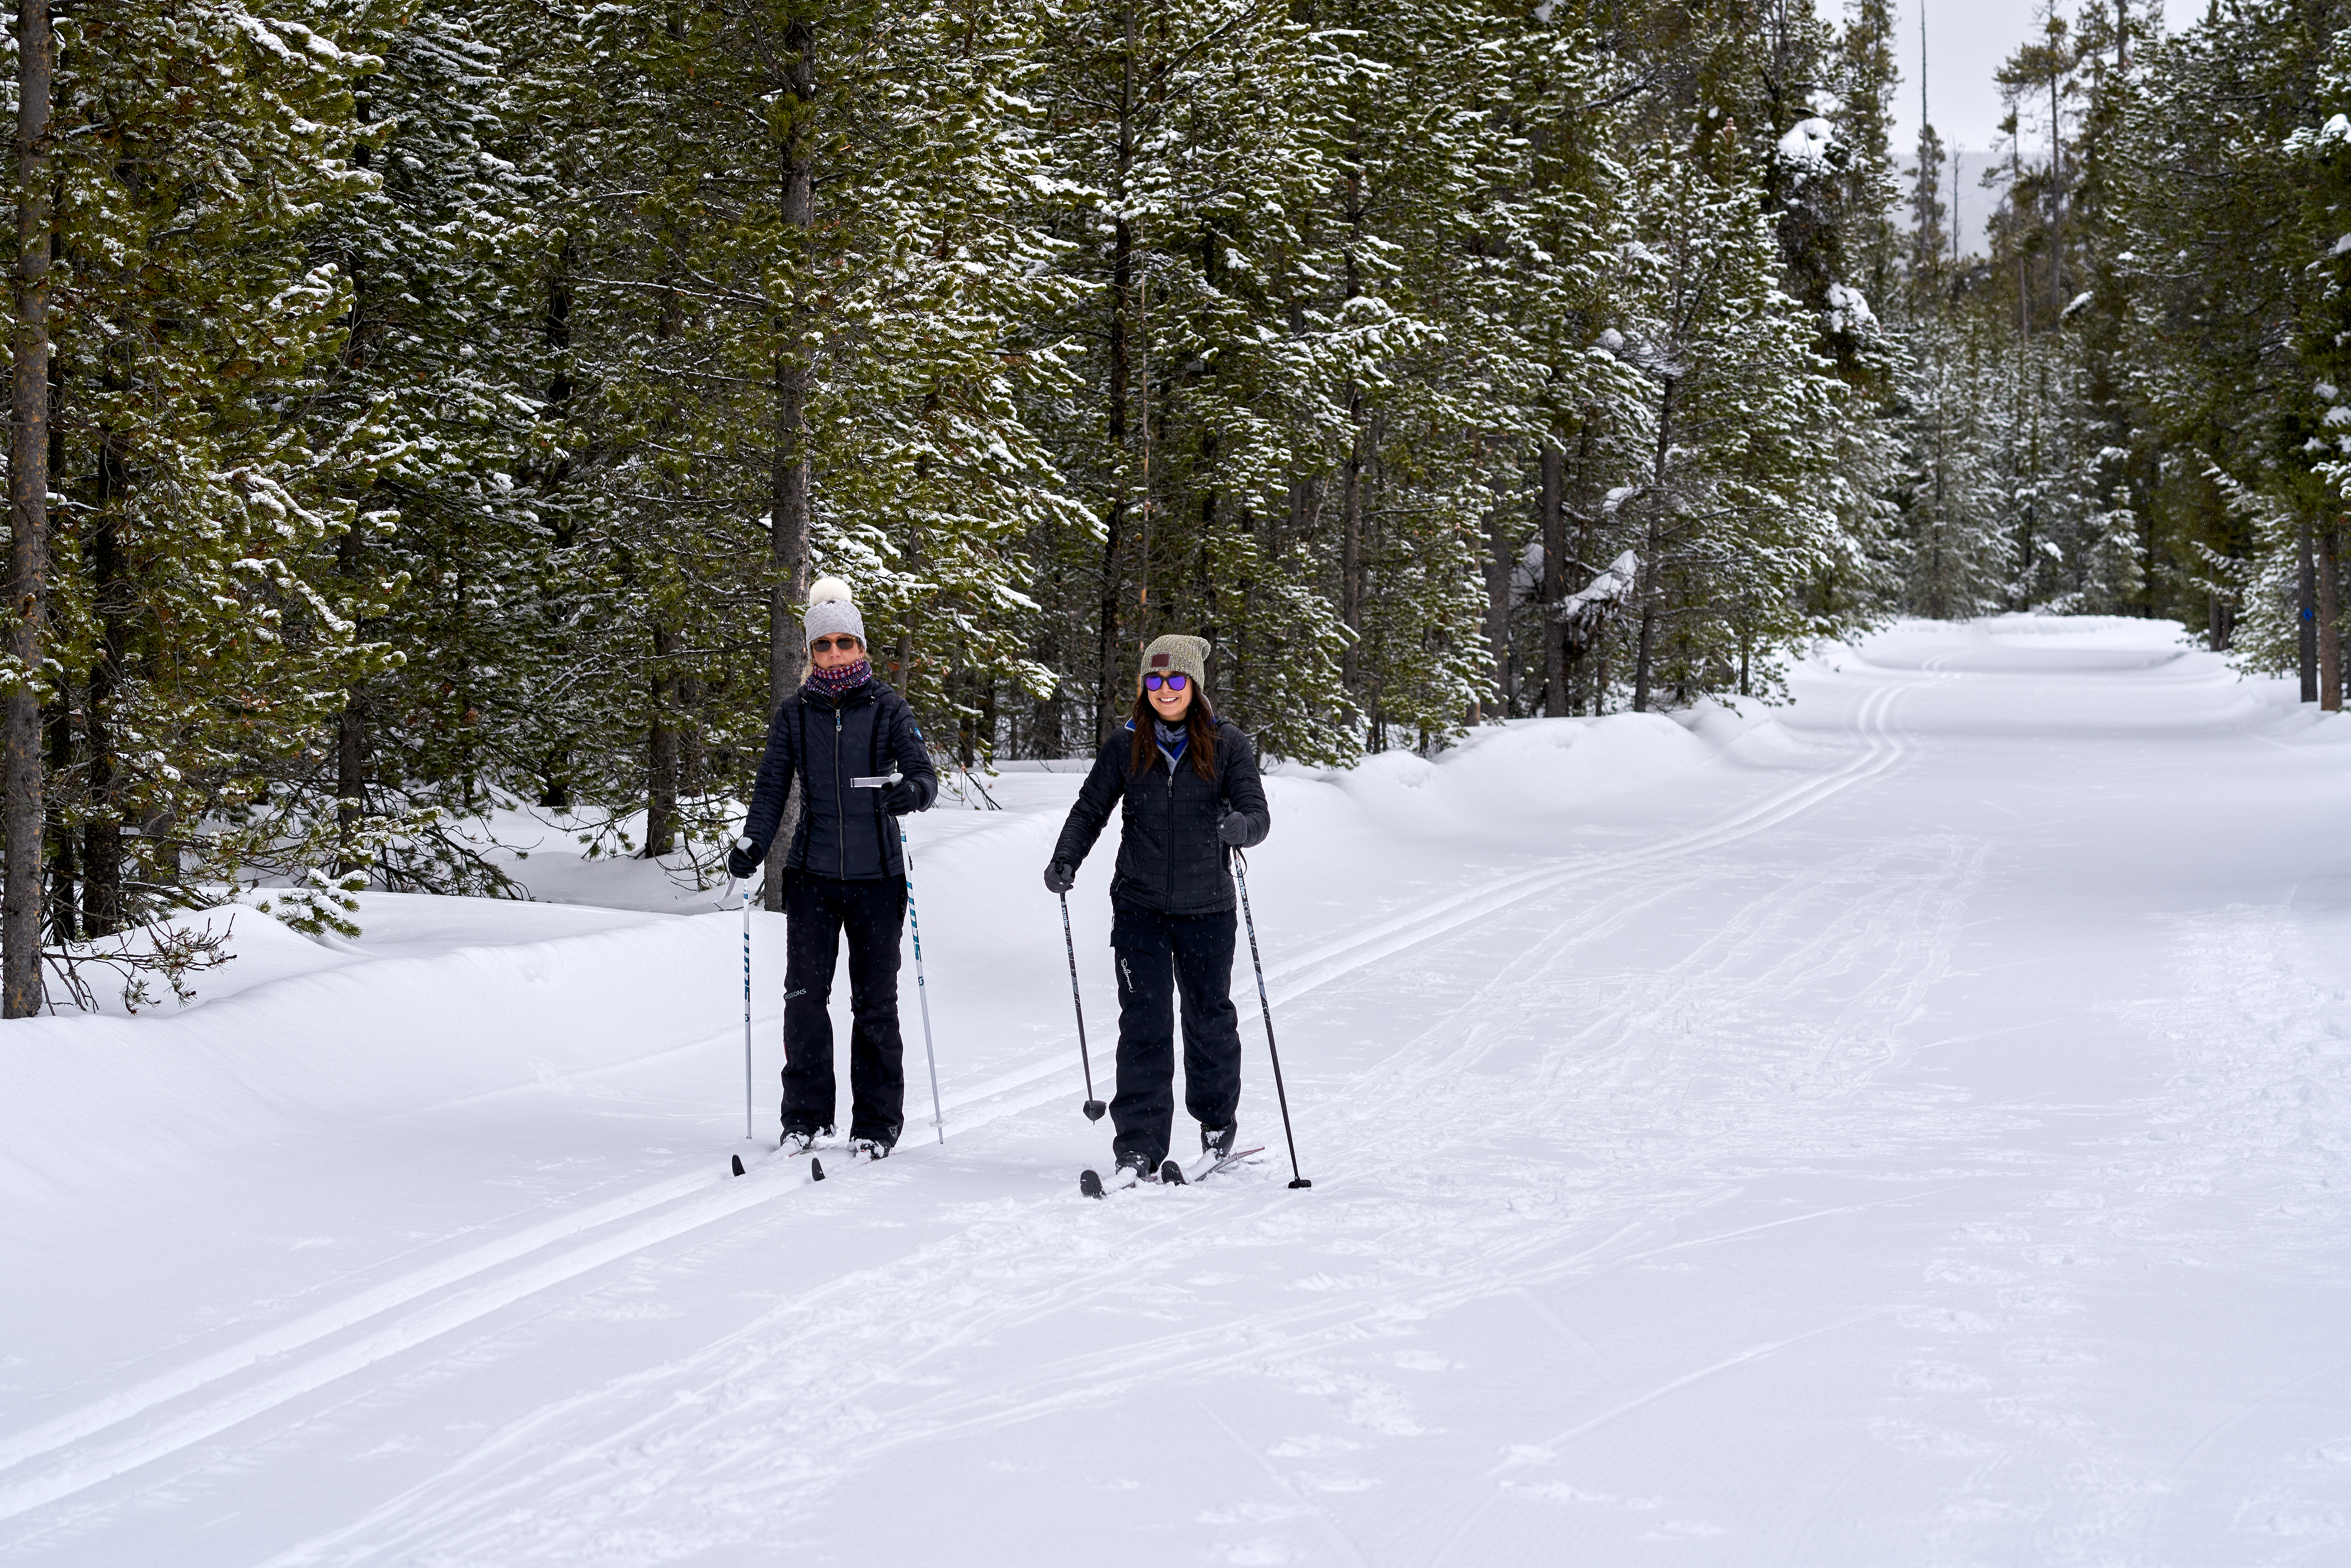 Two cross-country skiers near Yellowstone National Park